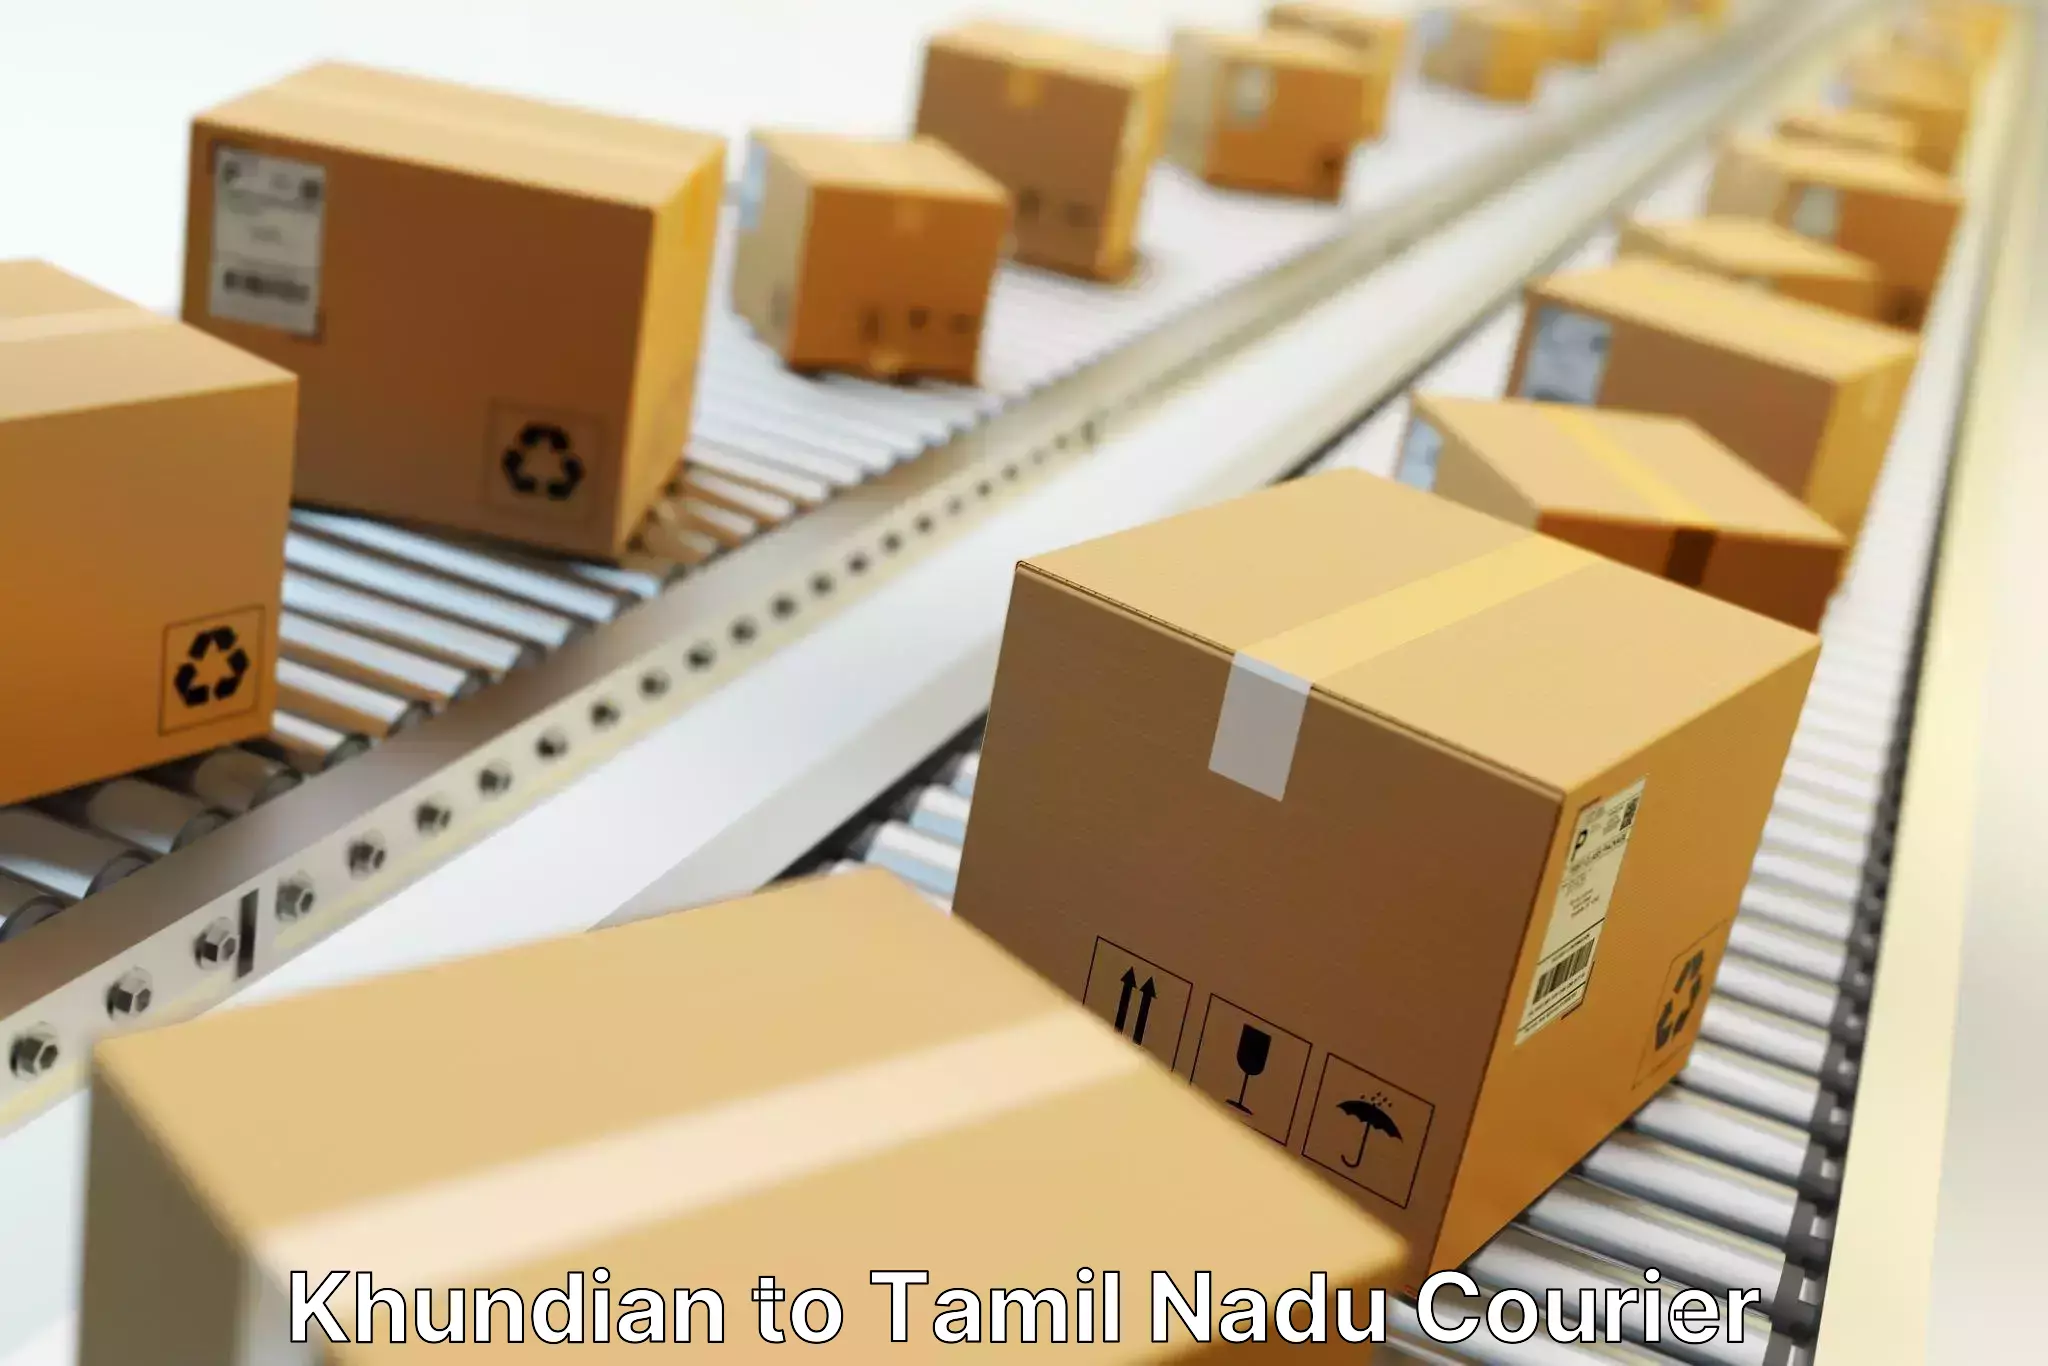 Flexible delivery scheduling Khundian to Tuticorin Port